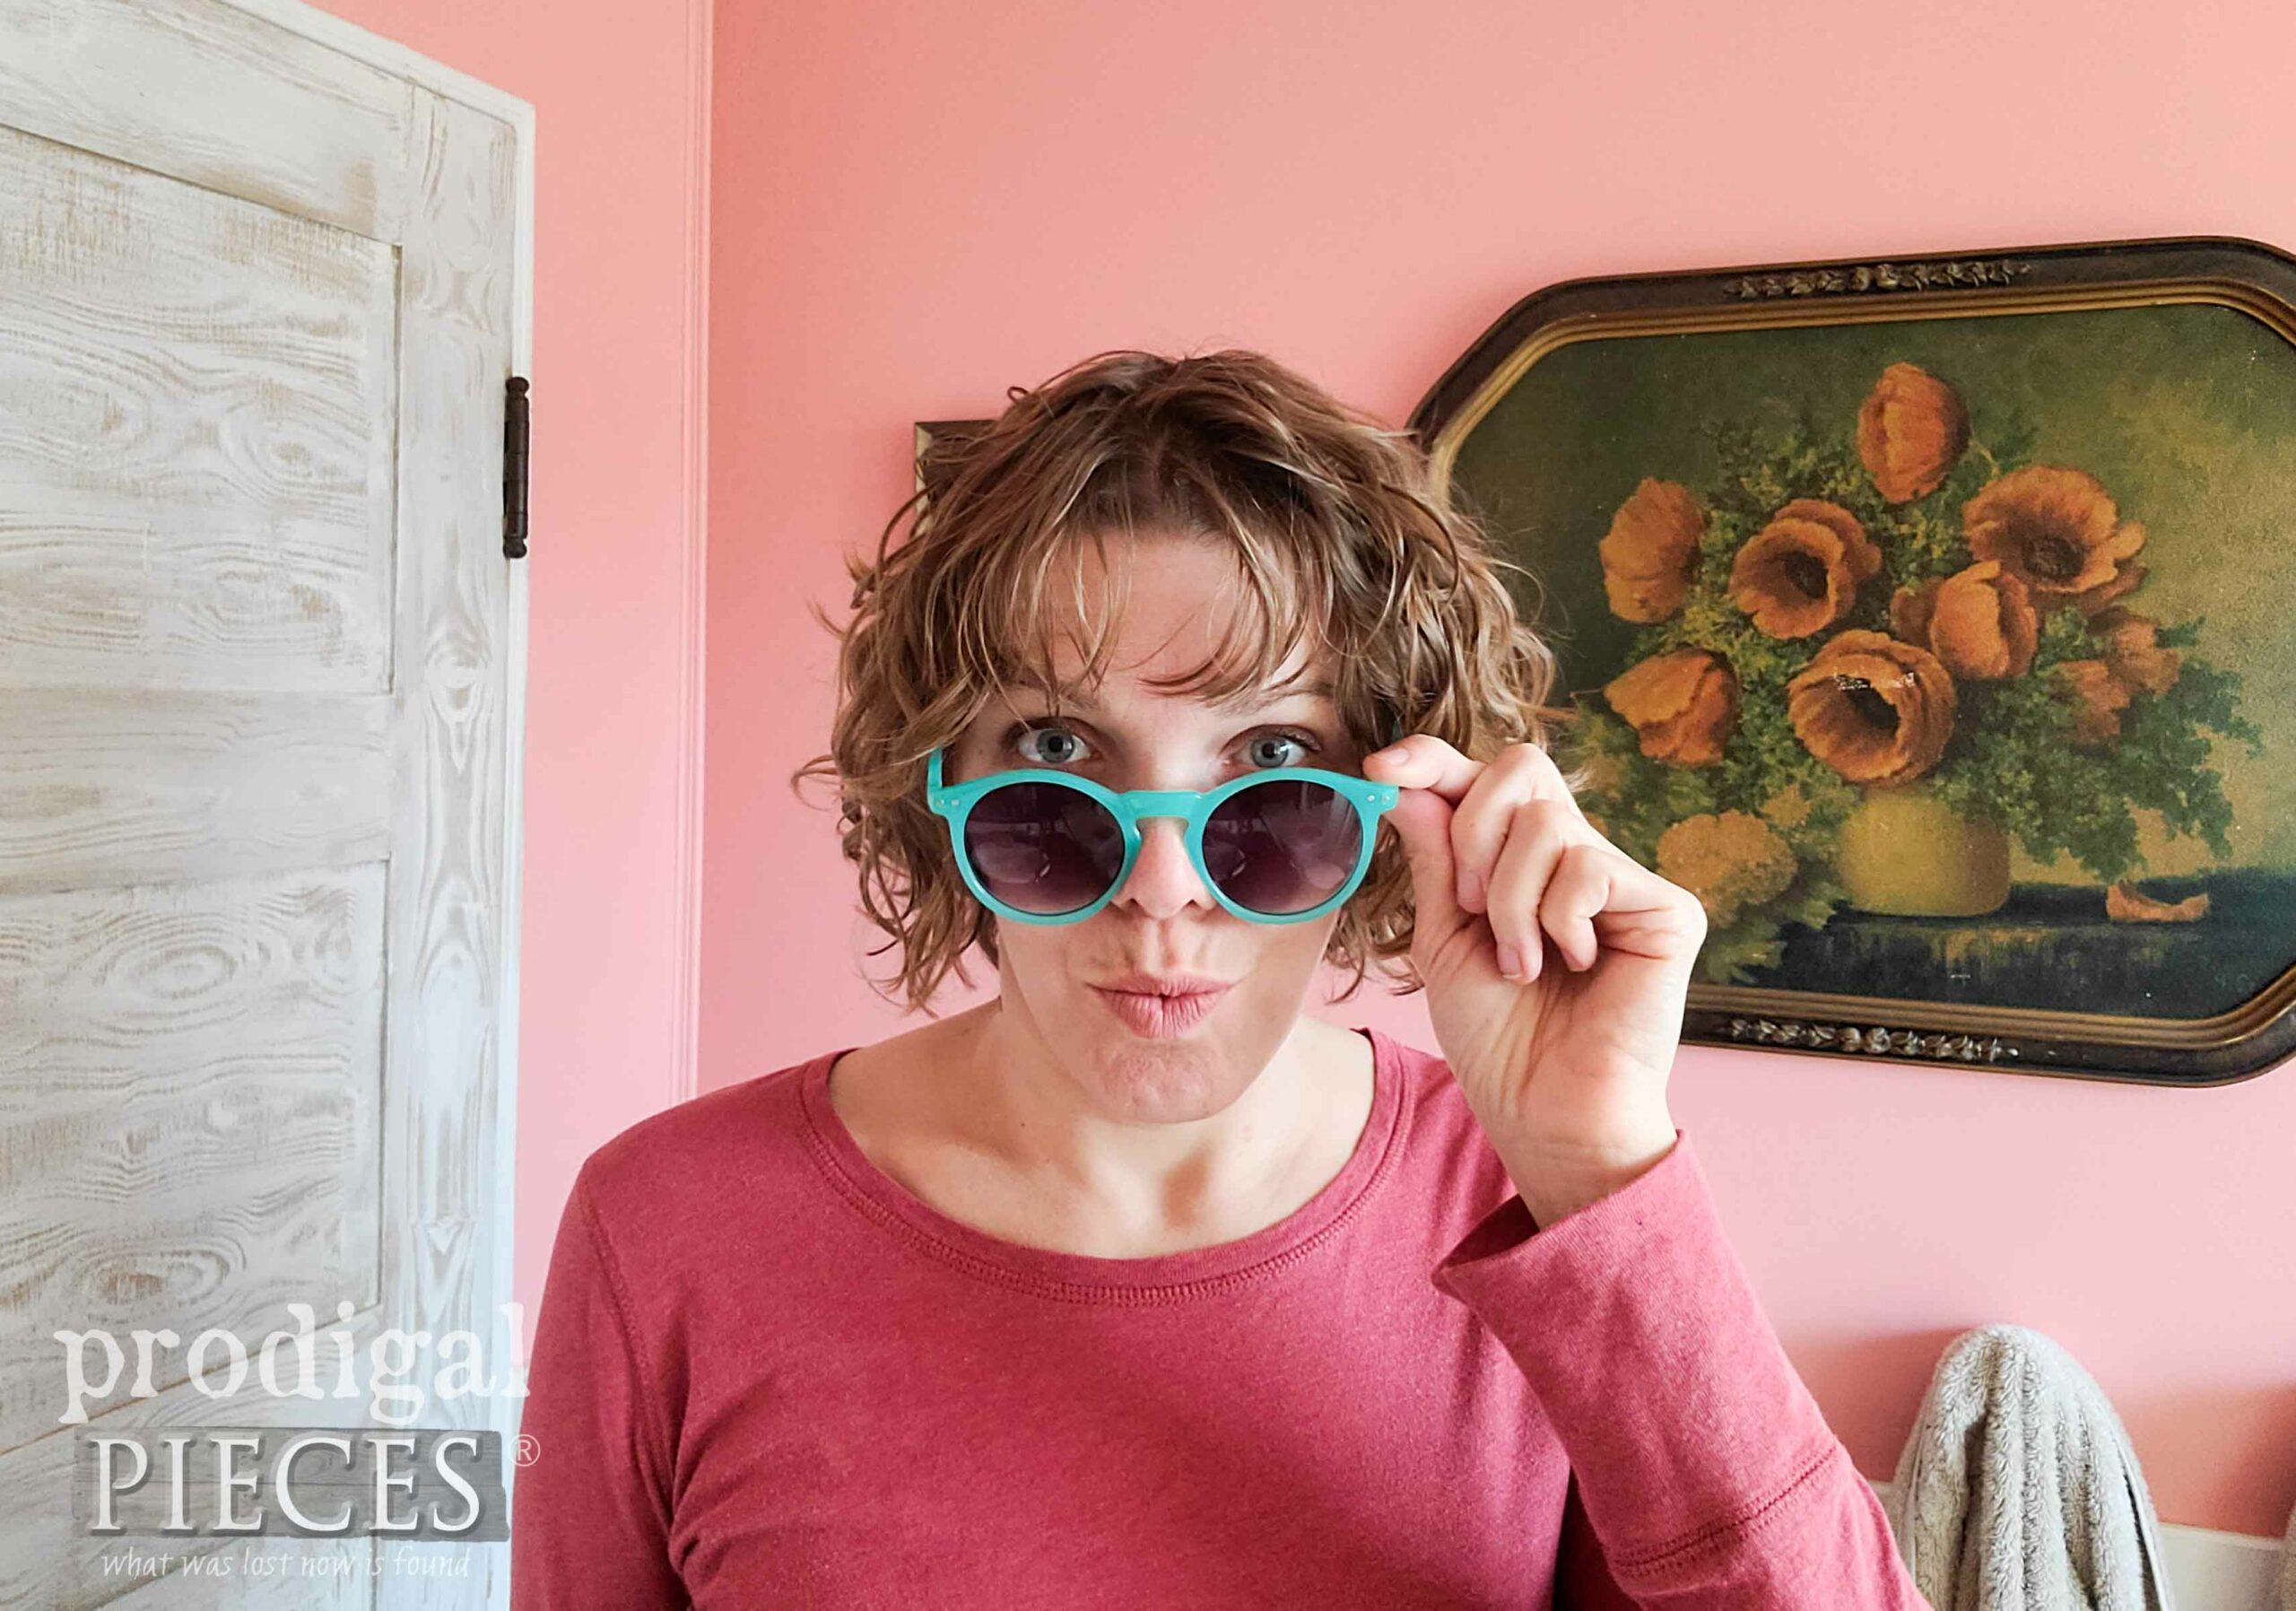 Tipped Sunglasses by Larissa of Prodigal Pieces with her DIY Short Curly Bob Haircut | prodigalpieces.com #prodigalpieces